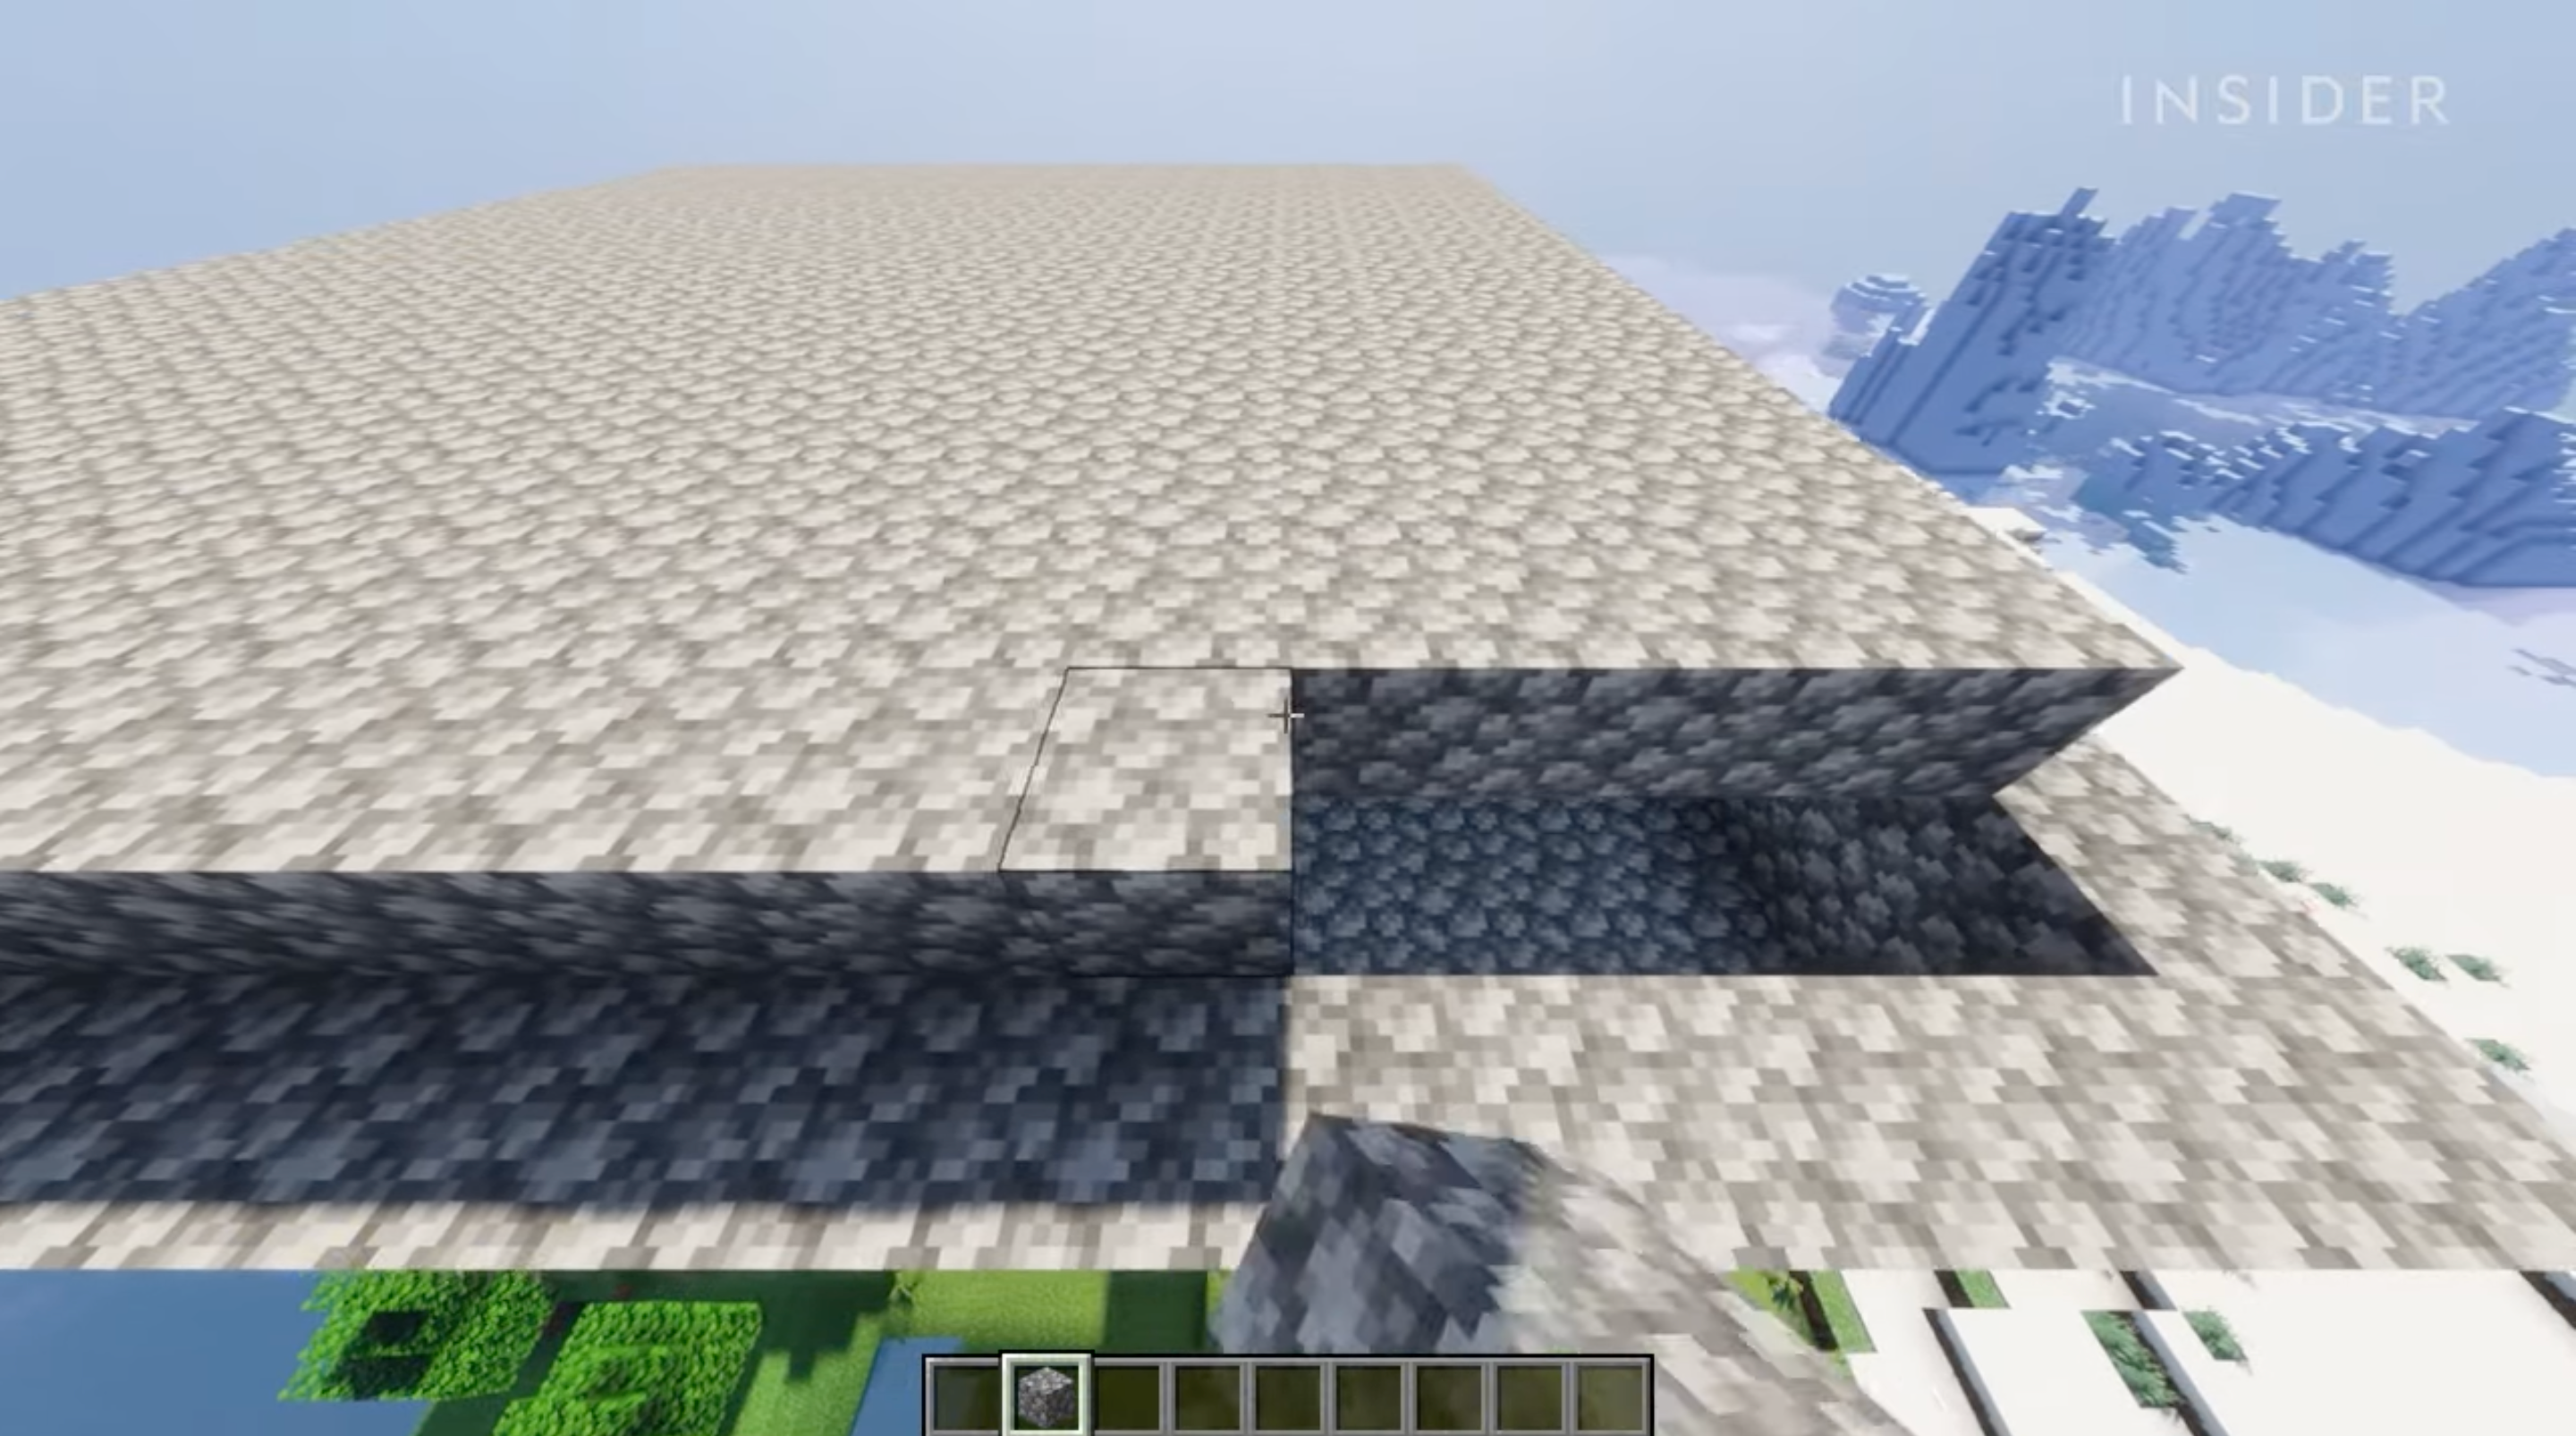 A screenshot from Minecraft, showing a roof being built.